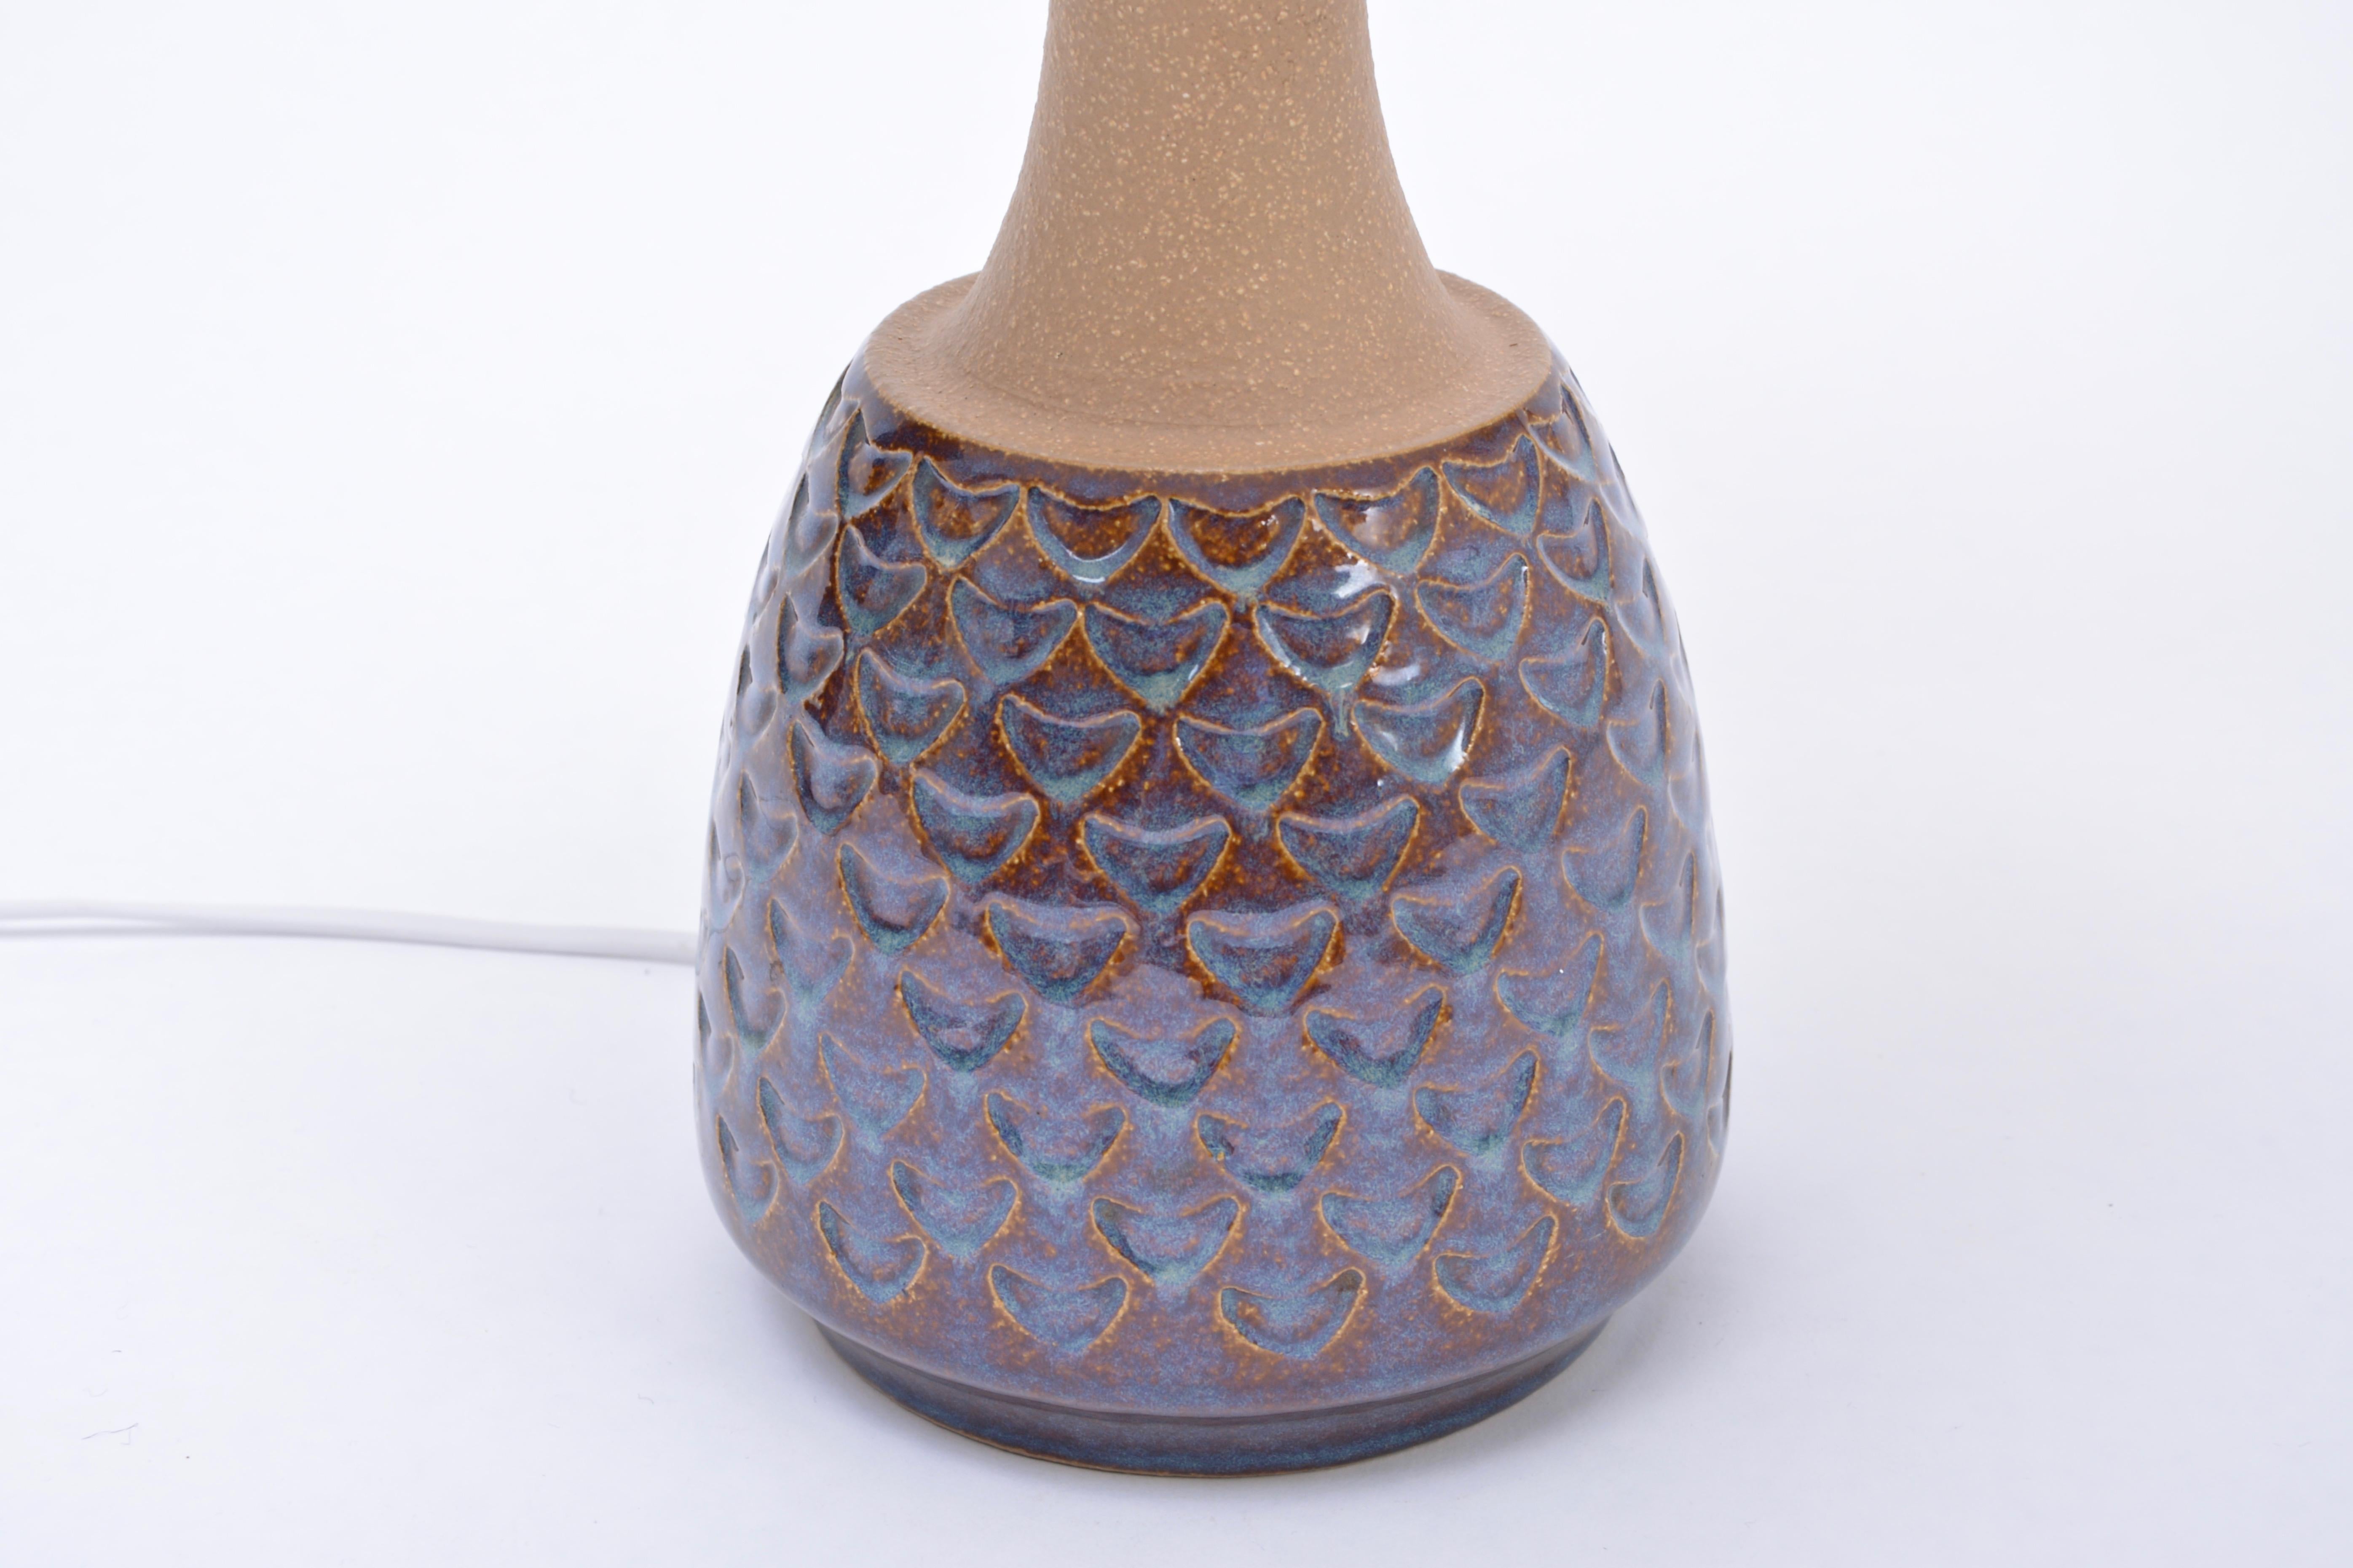 Handmade Danish Mid-Century Modern Stoneware lamp by Soholm In Good Condition For Sale In Berlin, DE